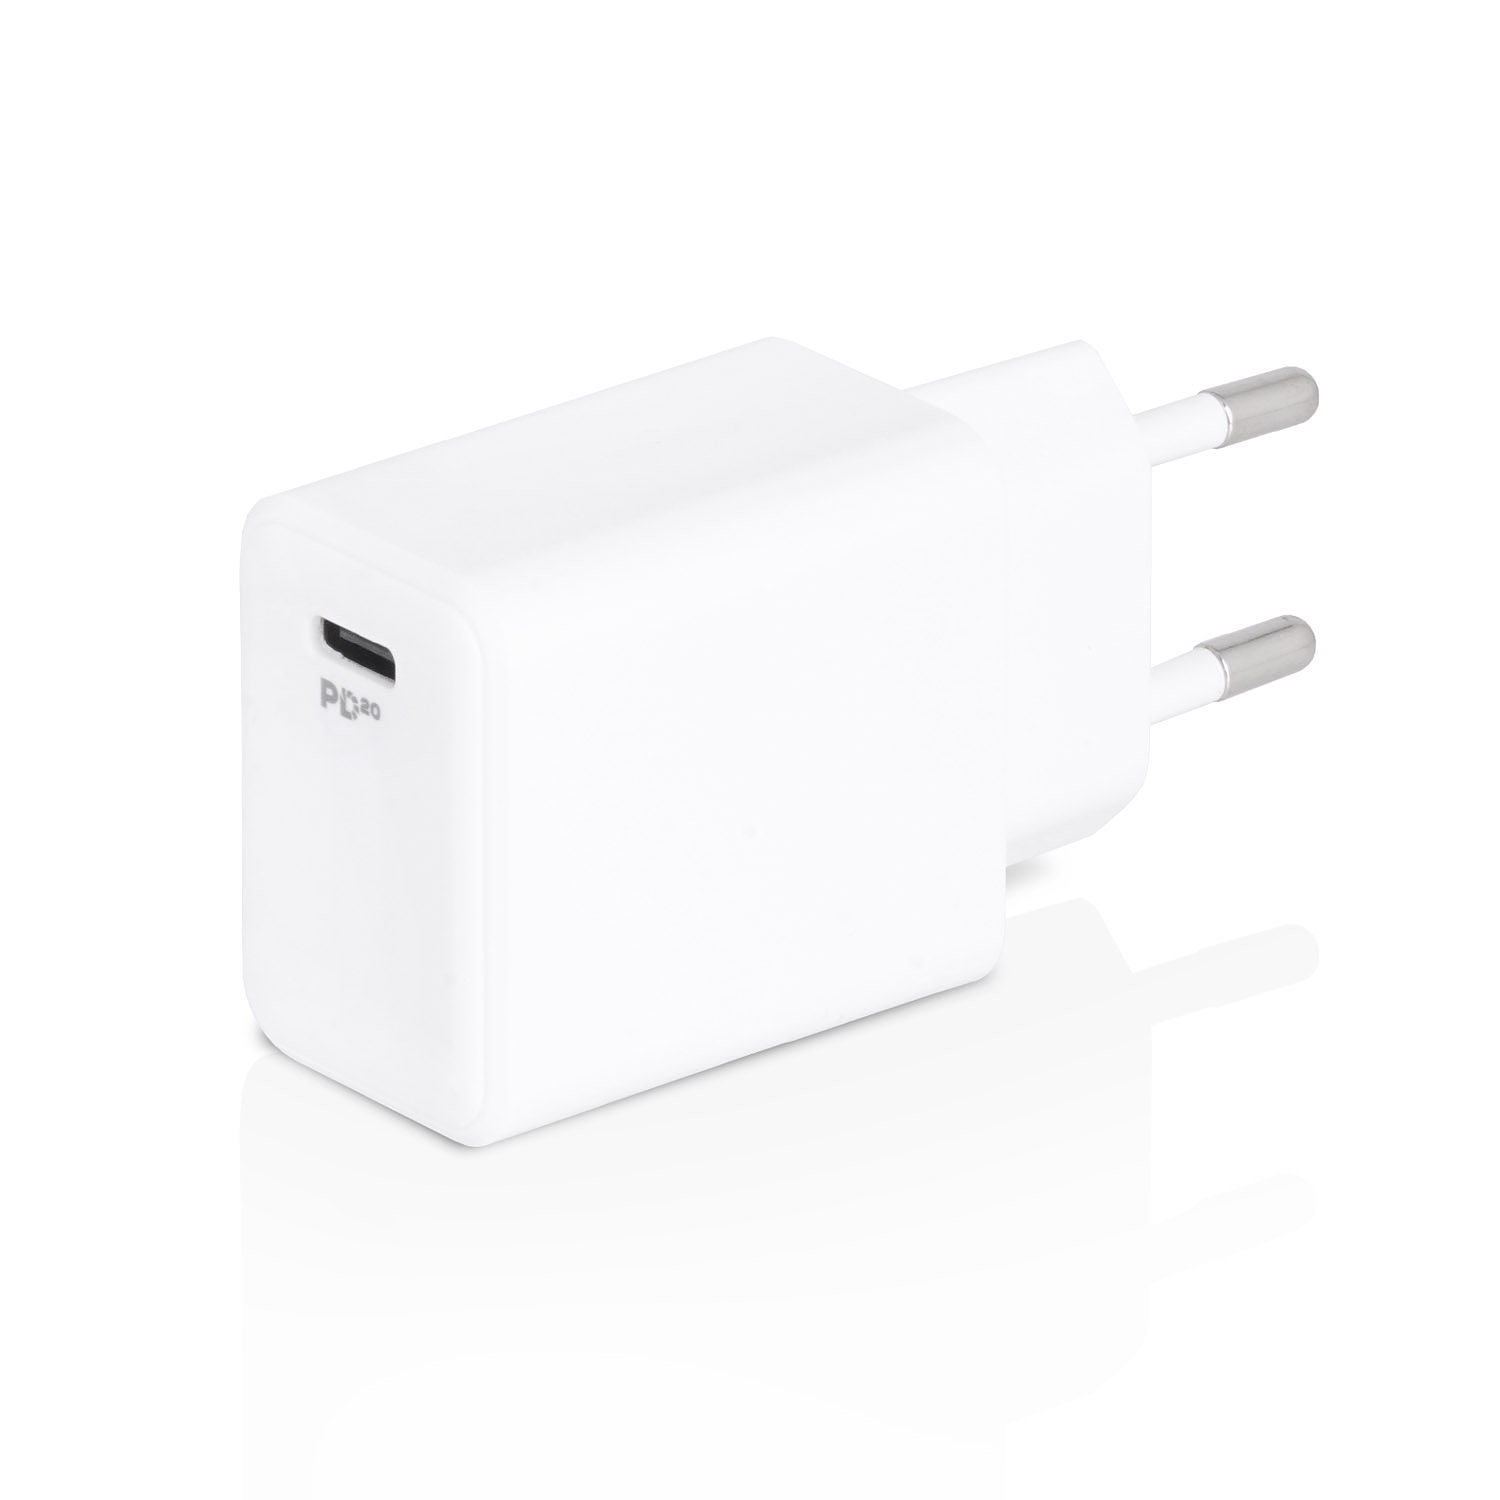 USB-C iPhone USB-C 11, Ladeadapter 14, Adapter WICKED Netzteil Fast Adapter für 13, 20W Ladegerät CHILI 12, Power Charge MagSafe